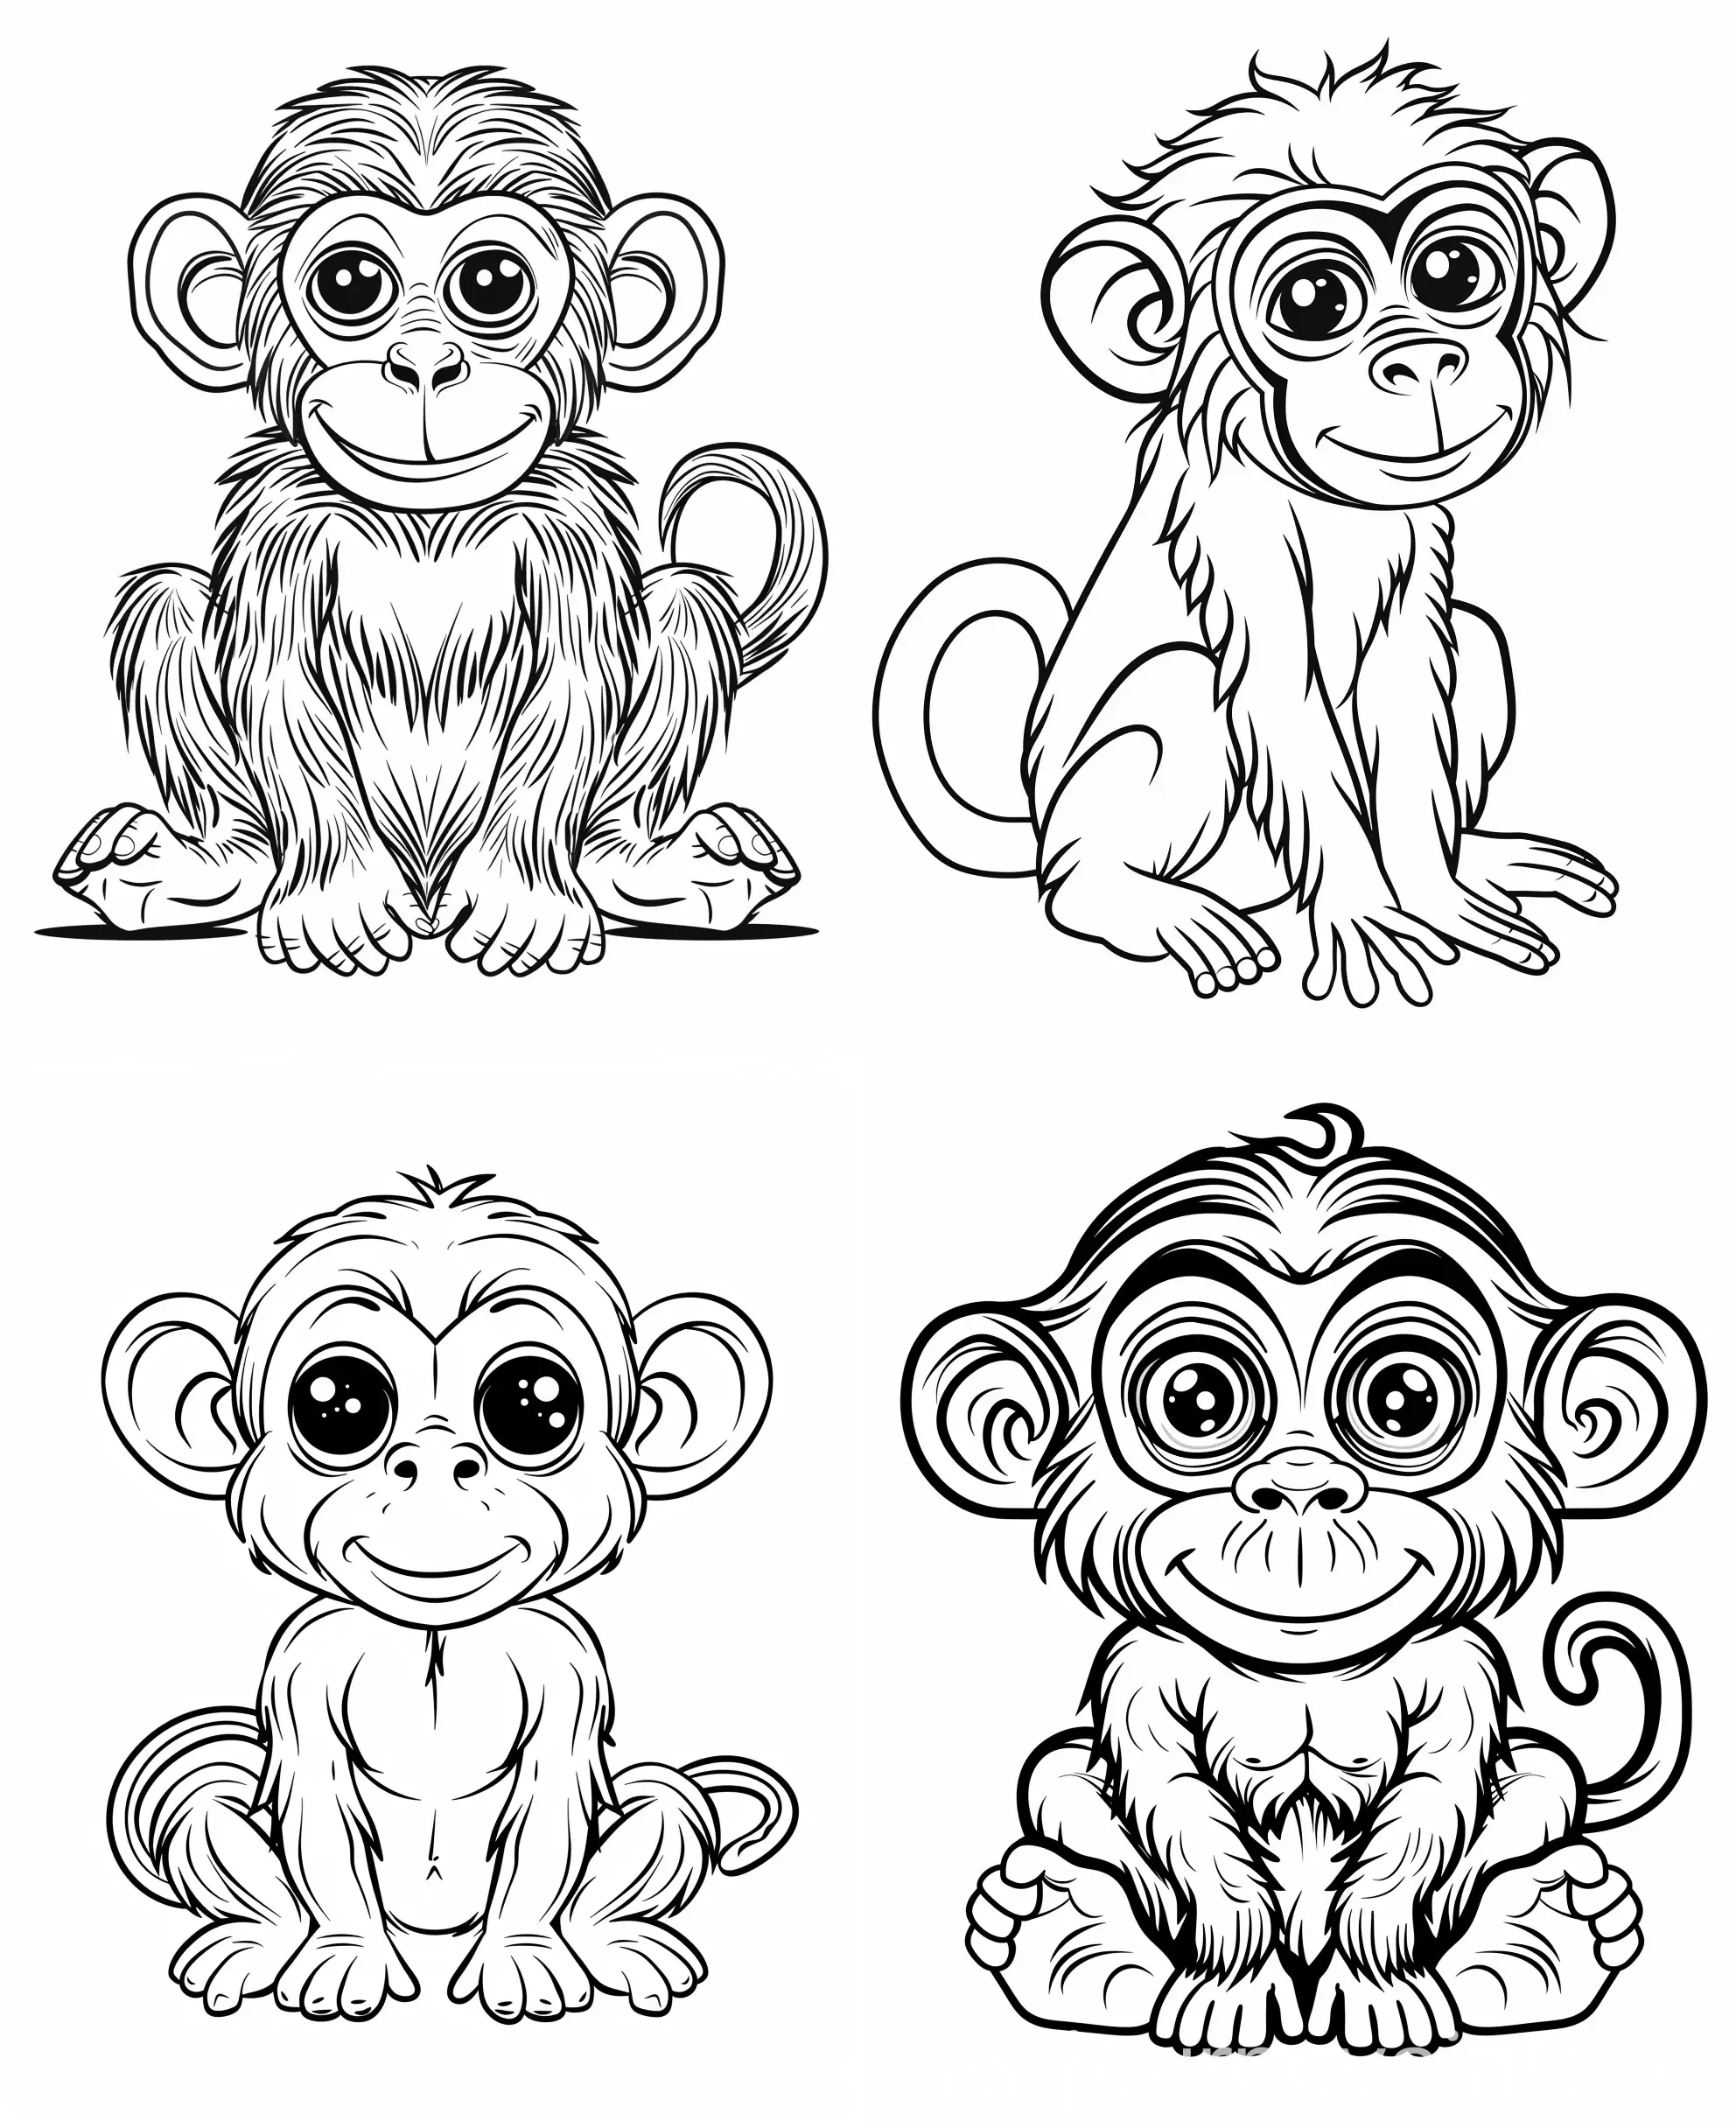 Coloring page of a cute Monkey, use clean lines and leave plenty of white space for coloring, simple line art, one line art, clean and minimalistic line, --ar 9:11 